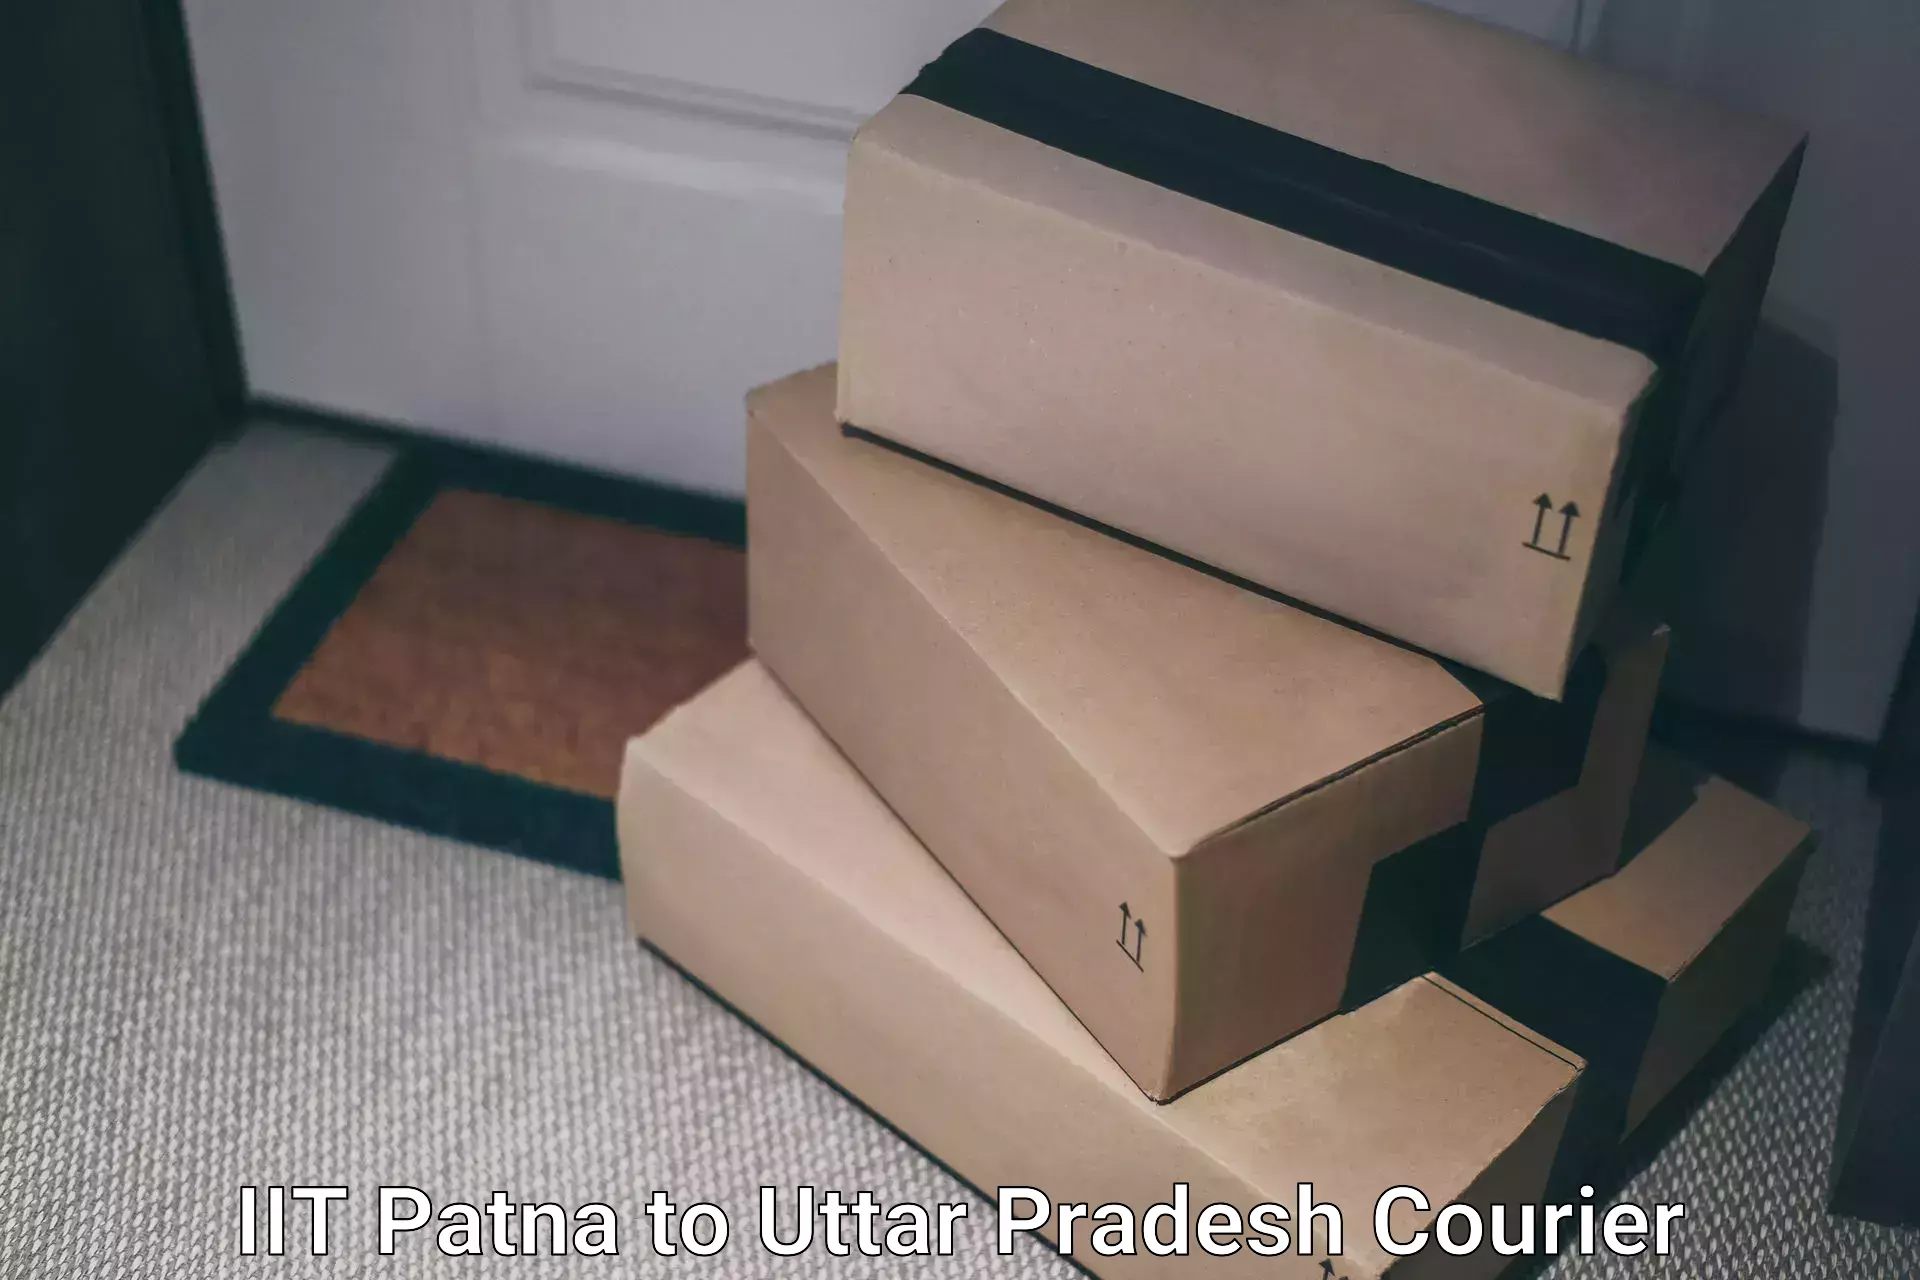 Reliable courier service IIT Patna to Faizabad